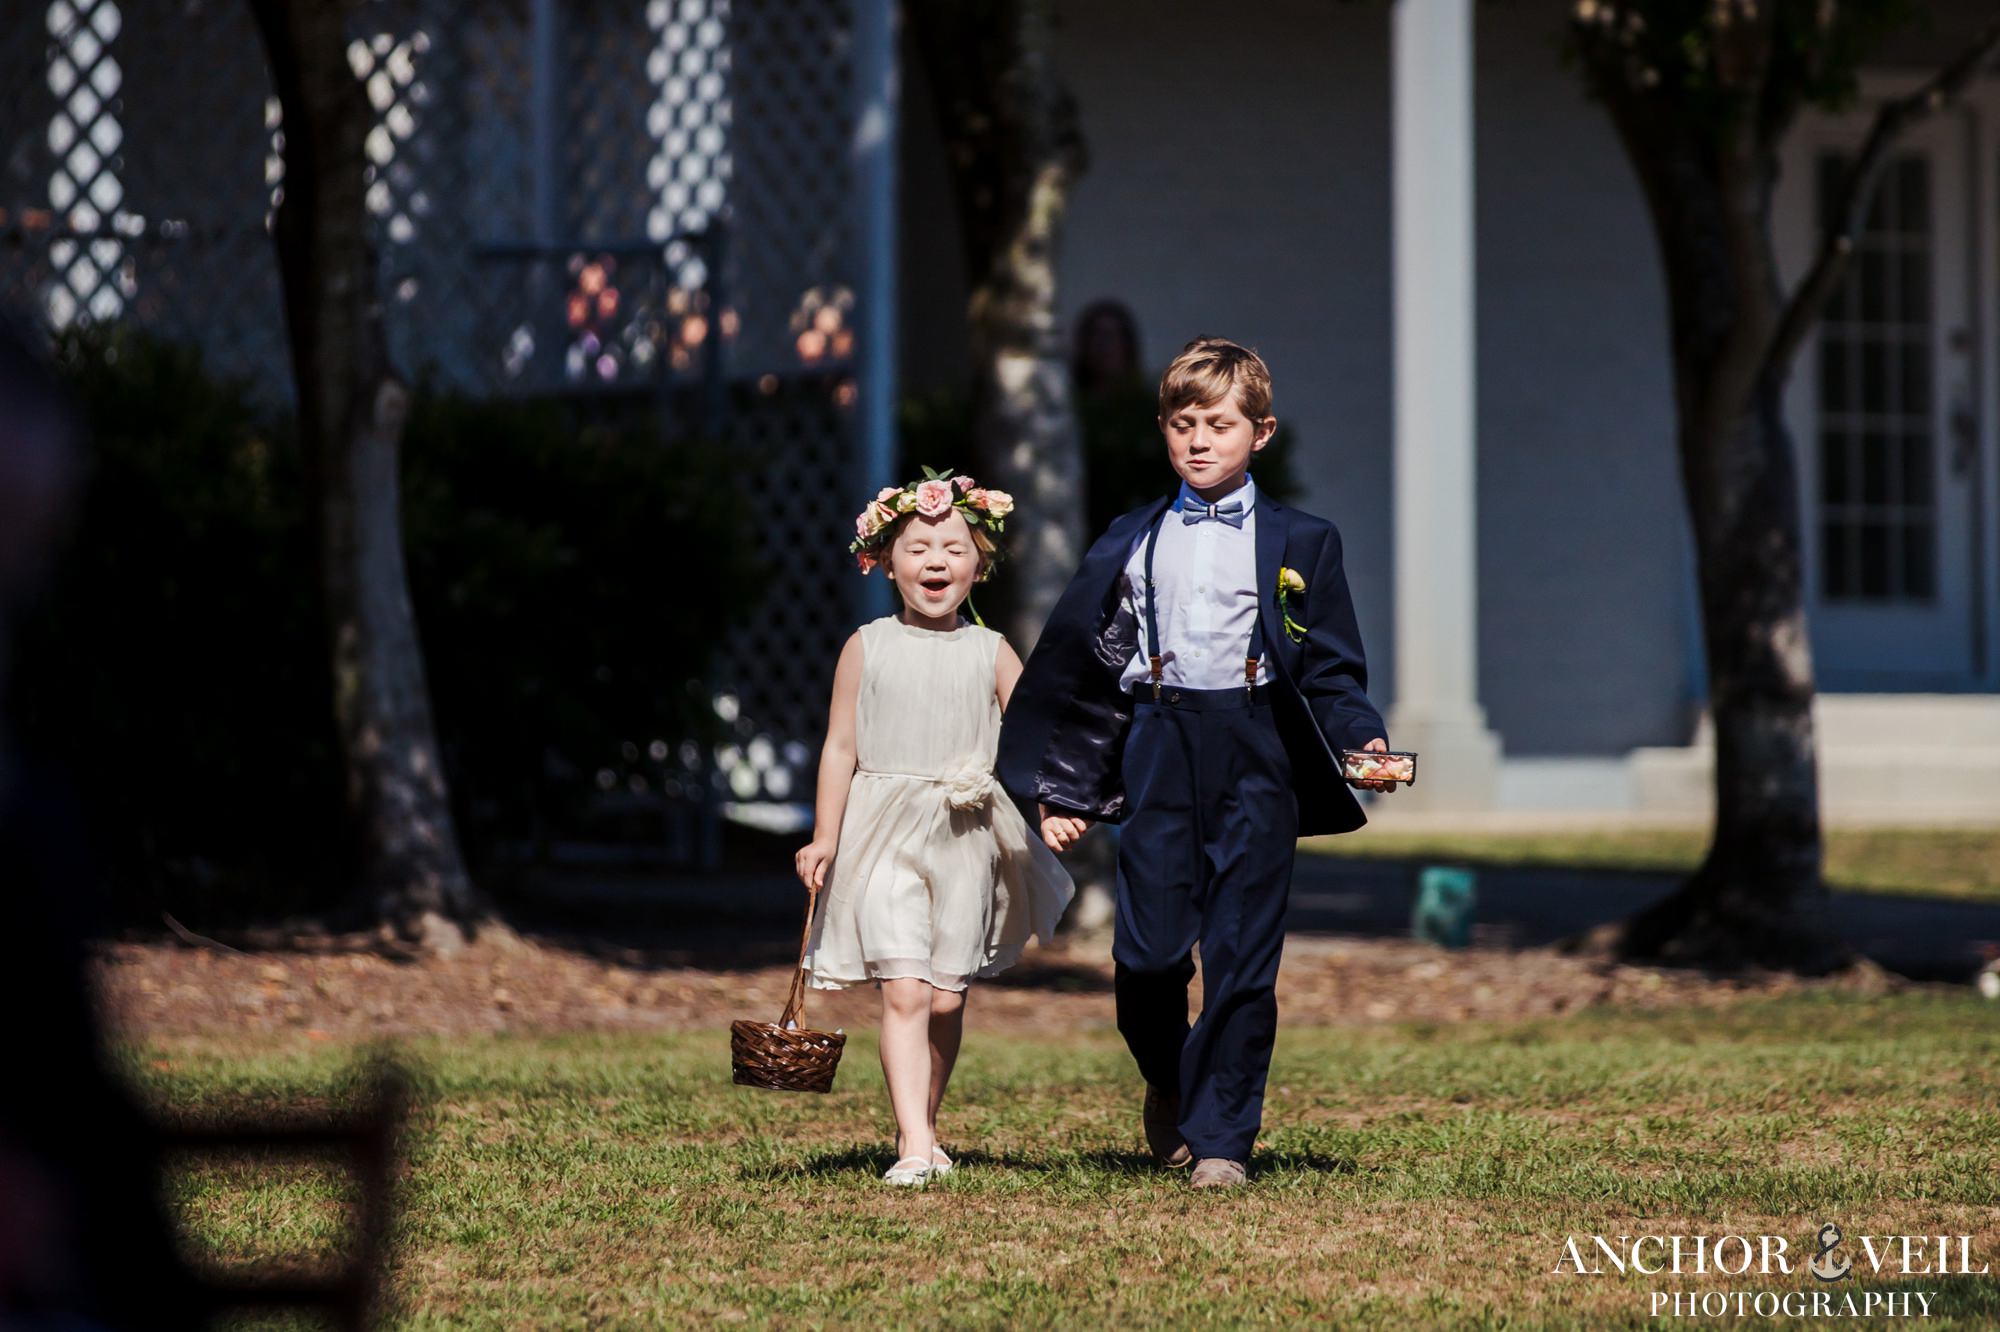 flower girl and ring bearer excited to walk down aisle